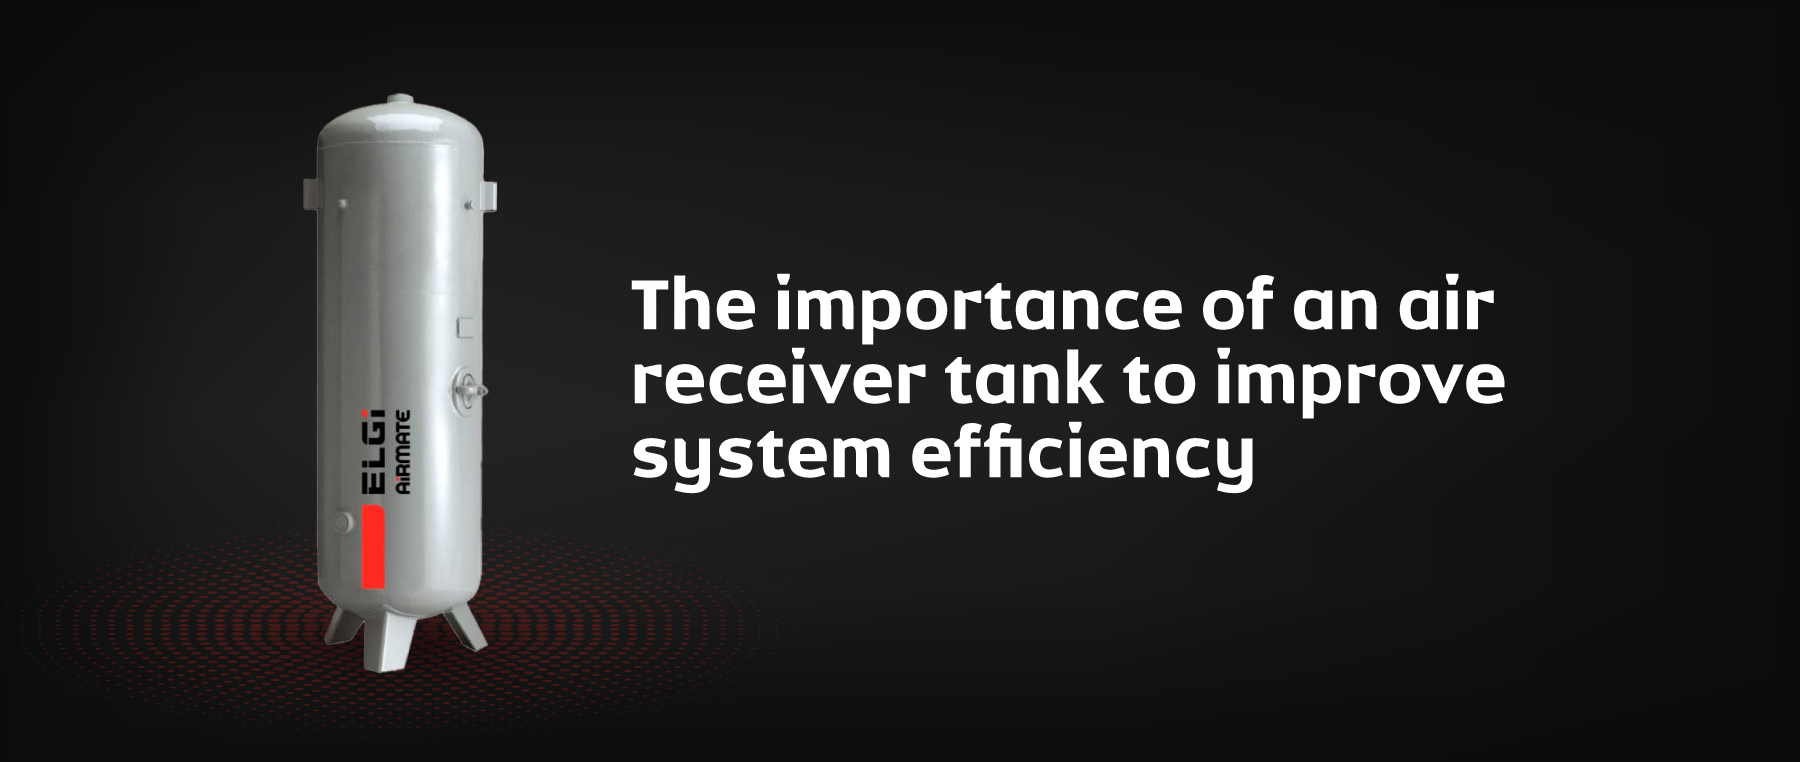 The importance of an air receiver tank to improve system efficiency